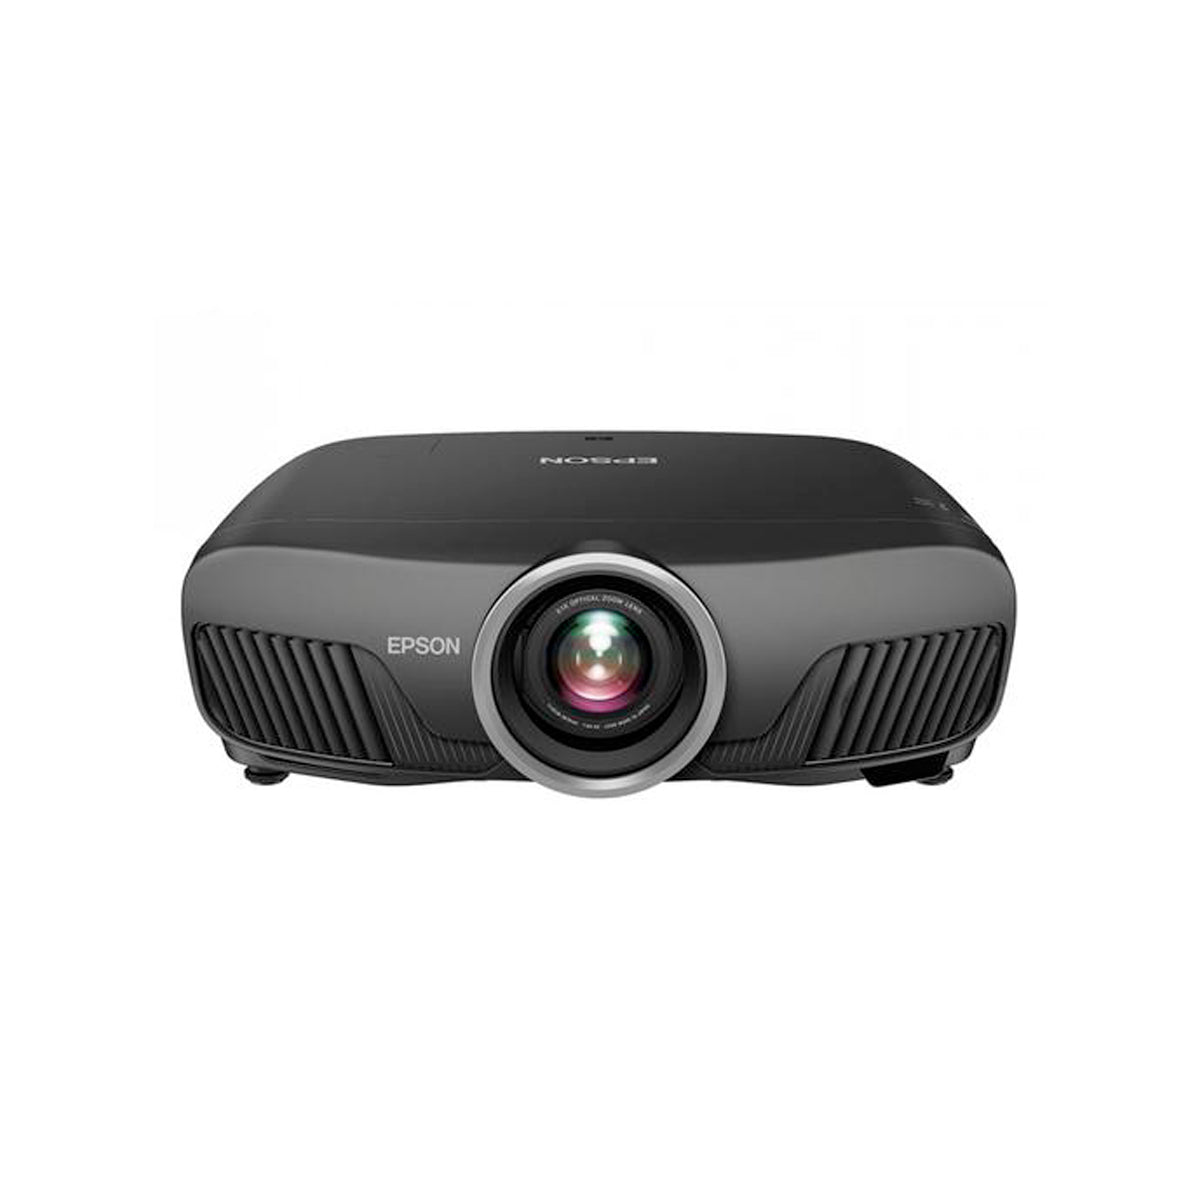 Epson Home Theatre Projector - The Audio Experts